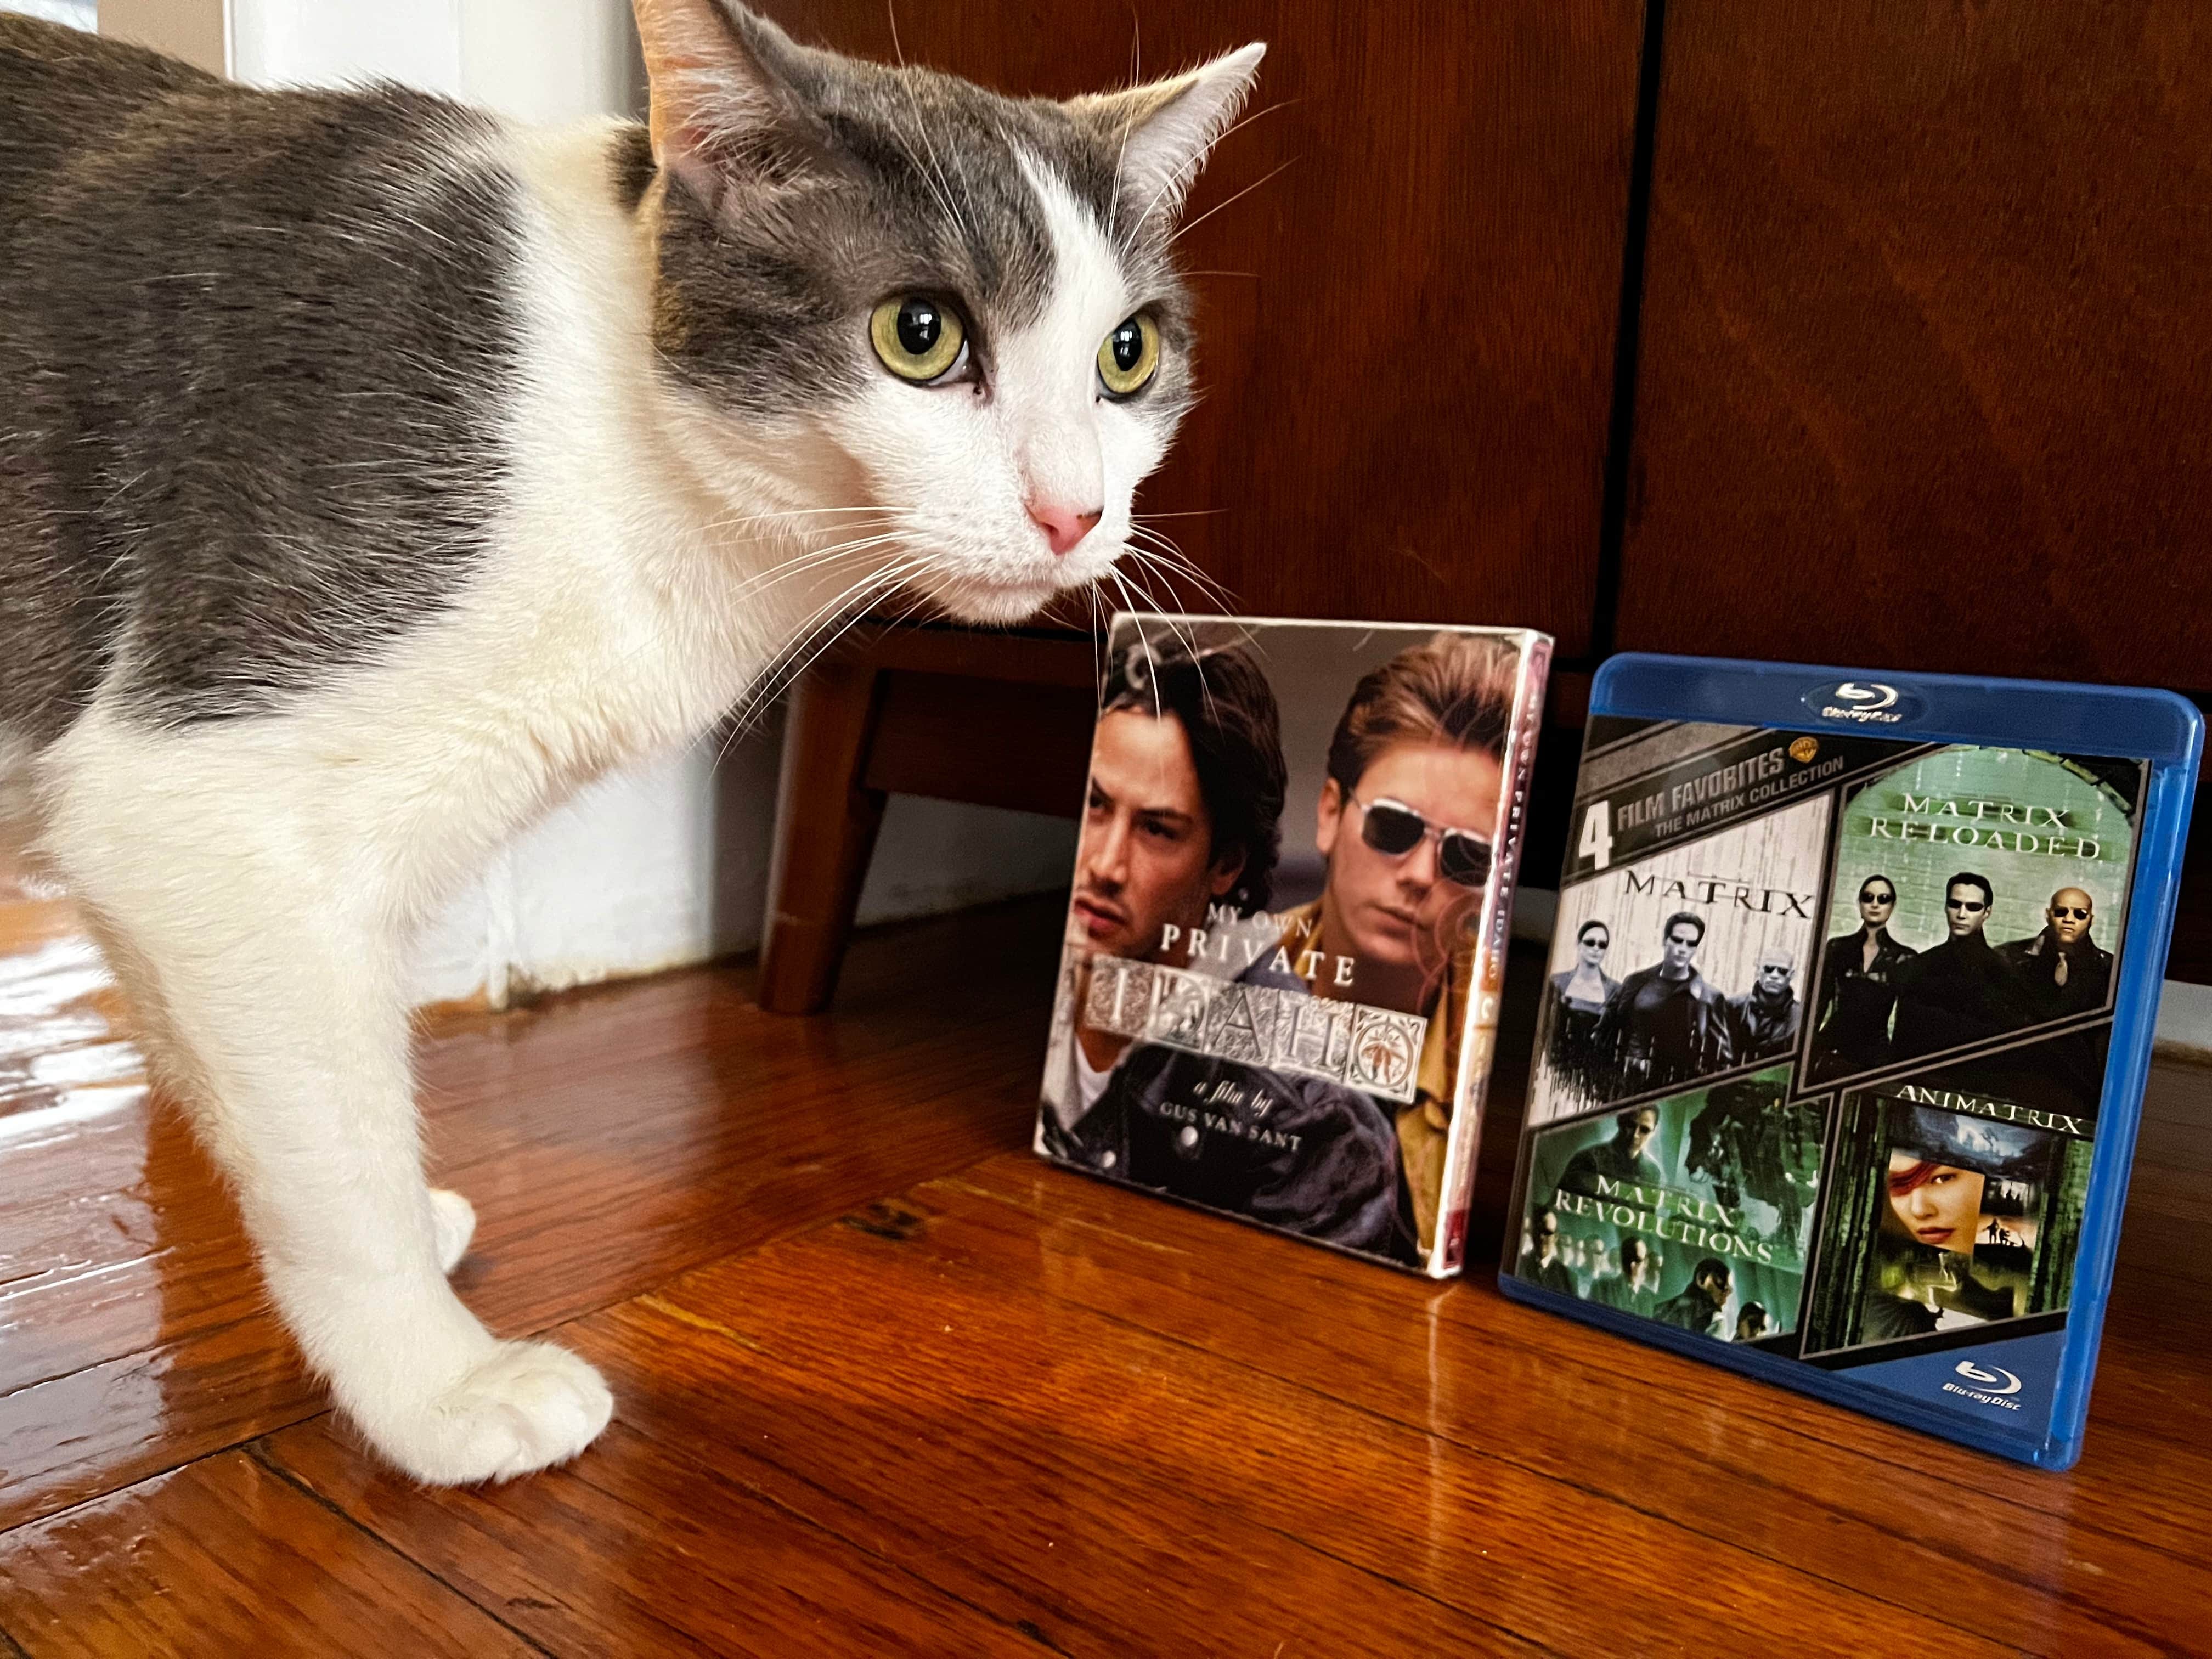 A cat stands in front of Blu-Ray copies of My Own Private Idaho and The Matrix trilogy.